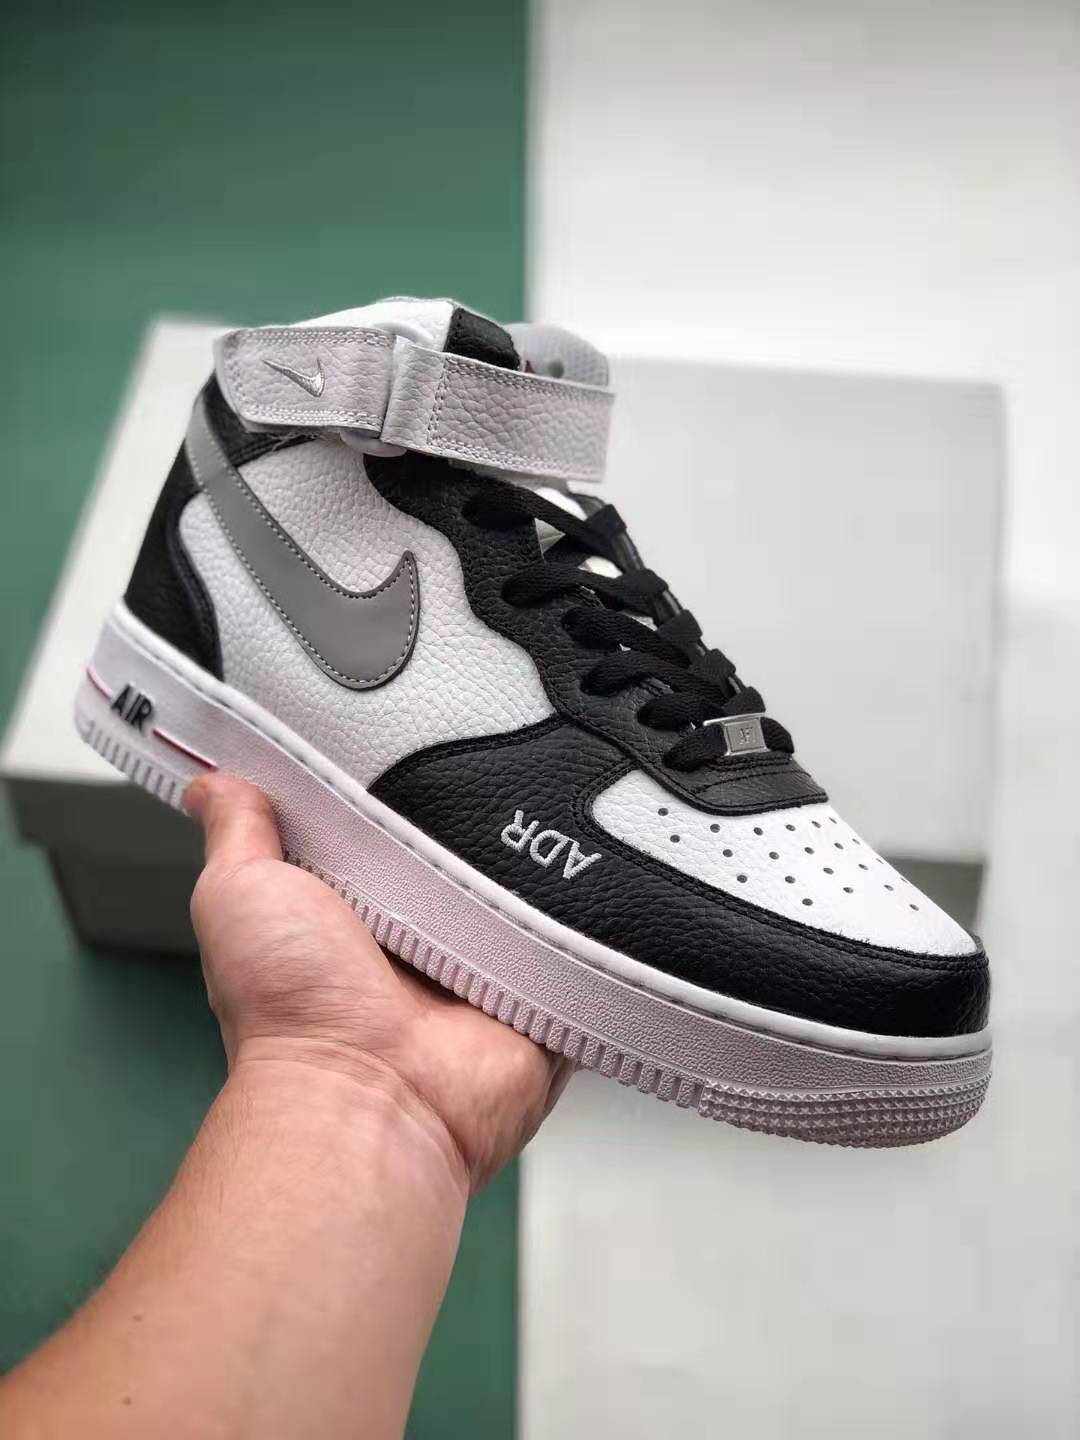 Nike Air Force 1 Mid 07 White Black 596728-303 - Classic Style for Every Occasion